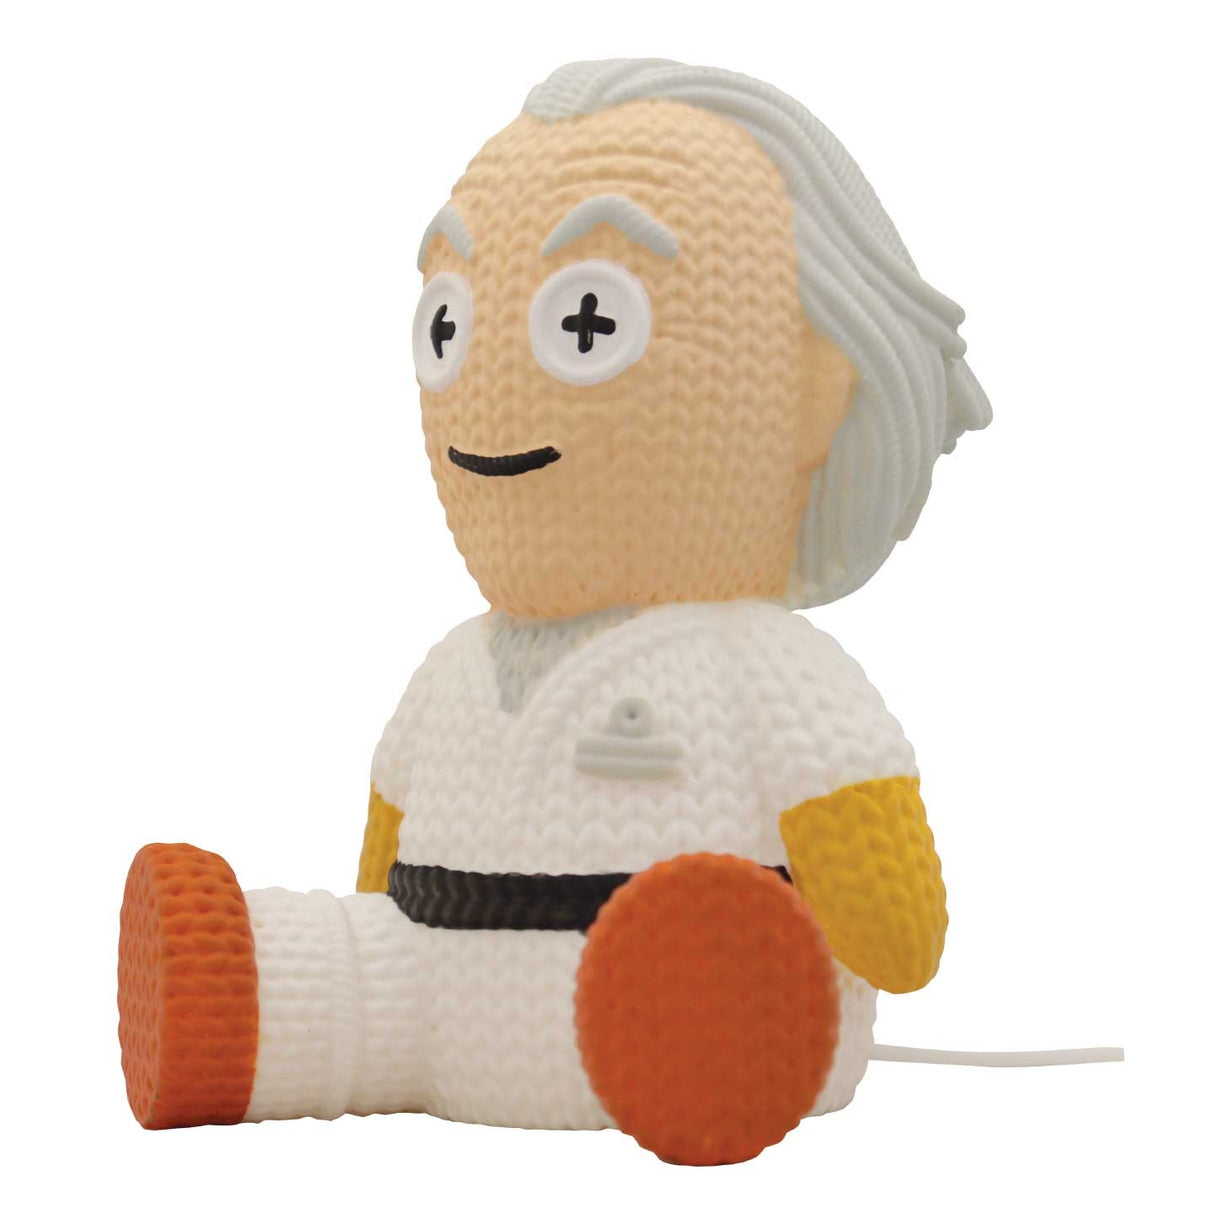 Dr. Emmett Brown | Back to The Future | Handmade by Robots | Vinyl Figure | Knit Series #145